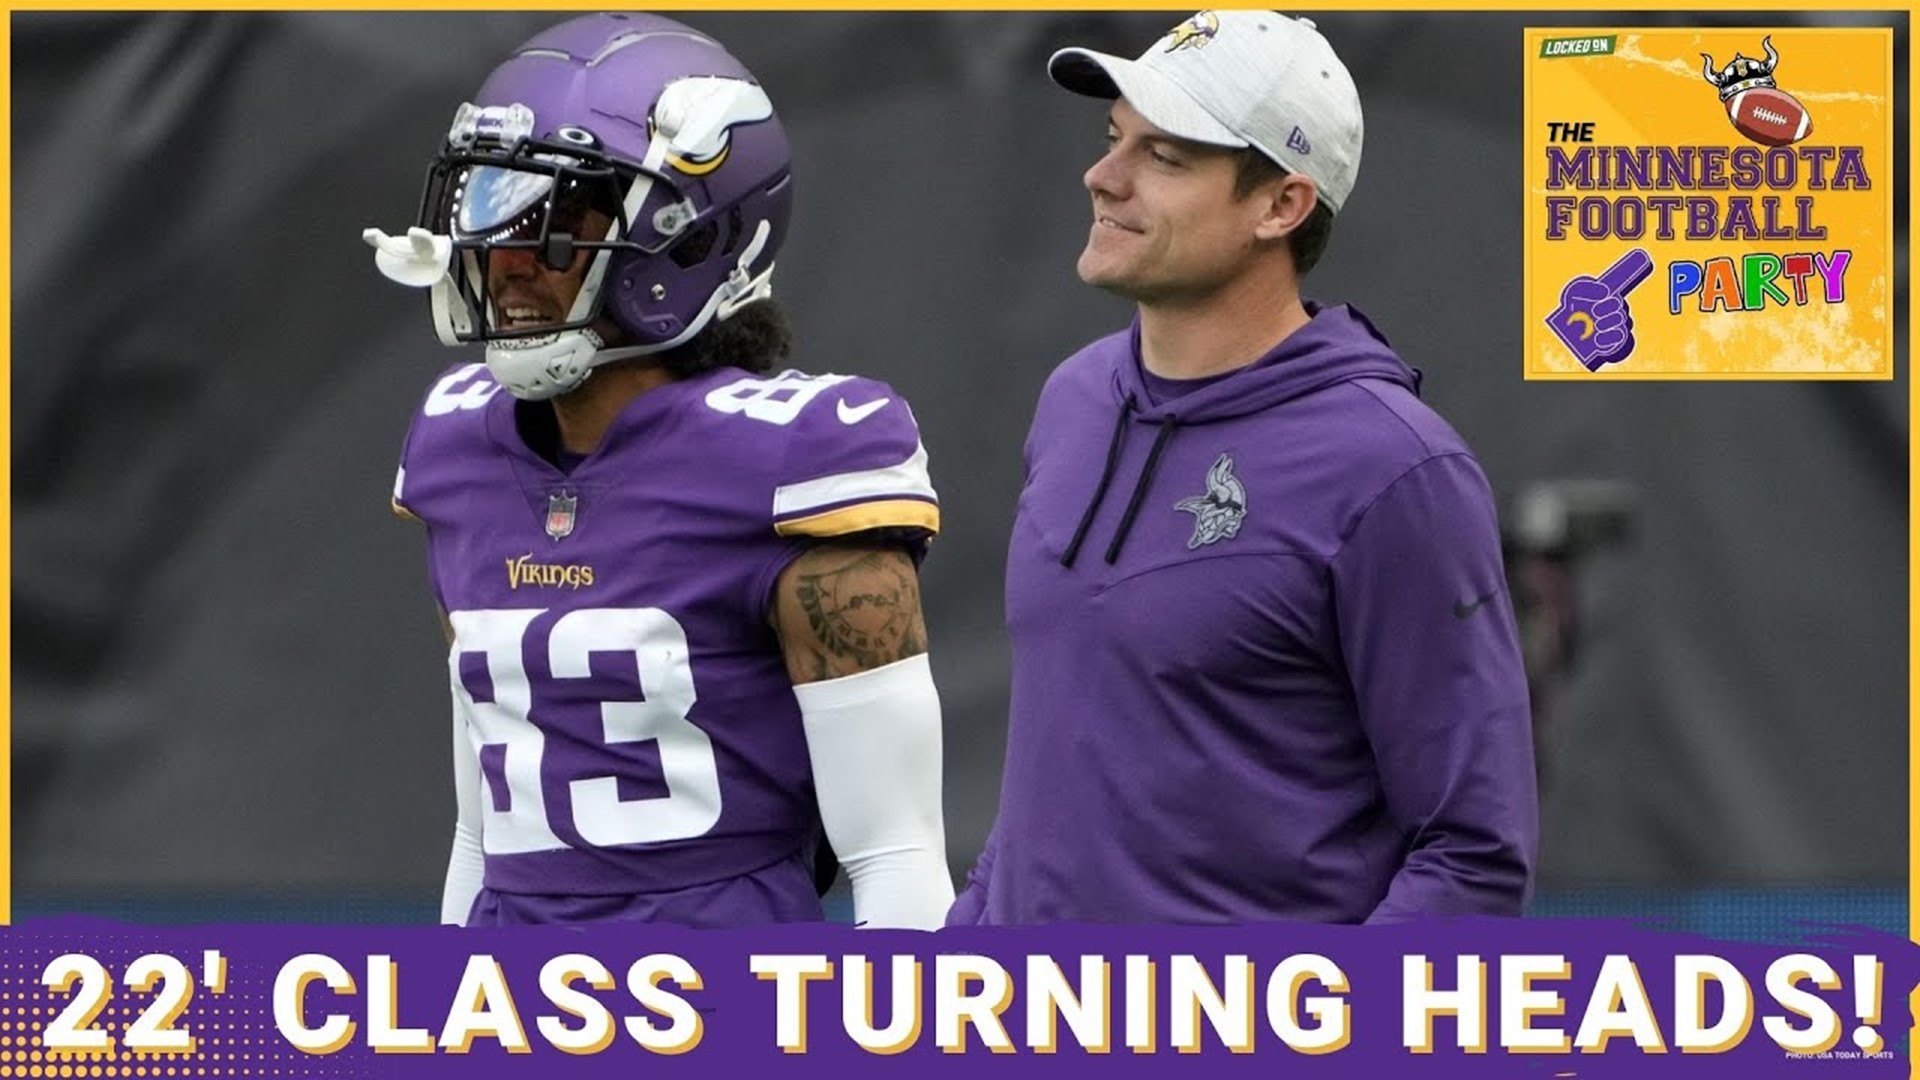 The Most Compelling Stories From Minnesota Vikings OTAs So Far - The Minnesota Football Party